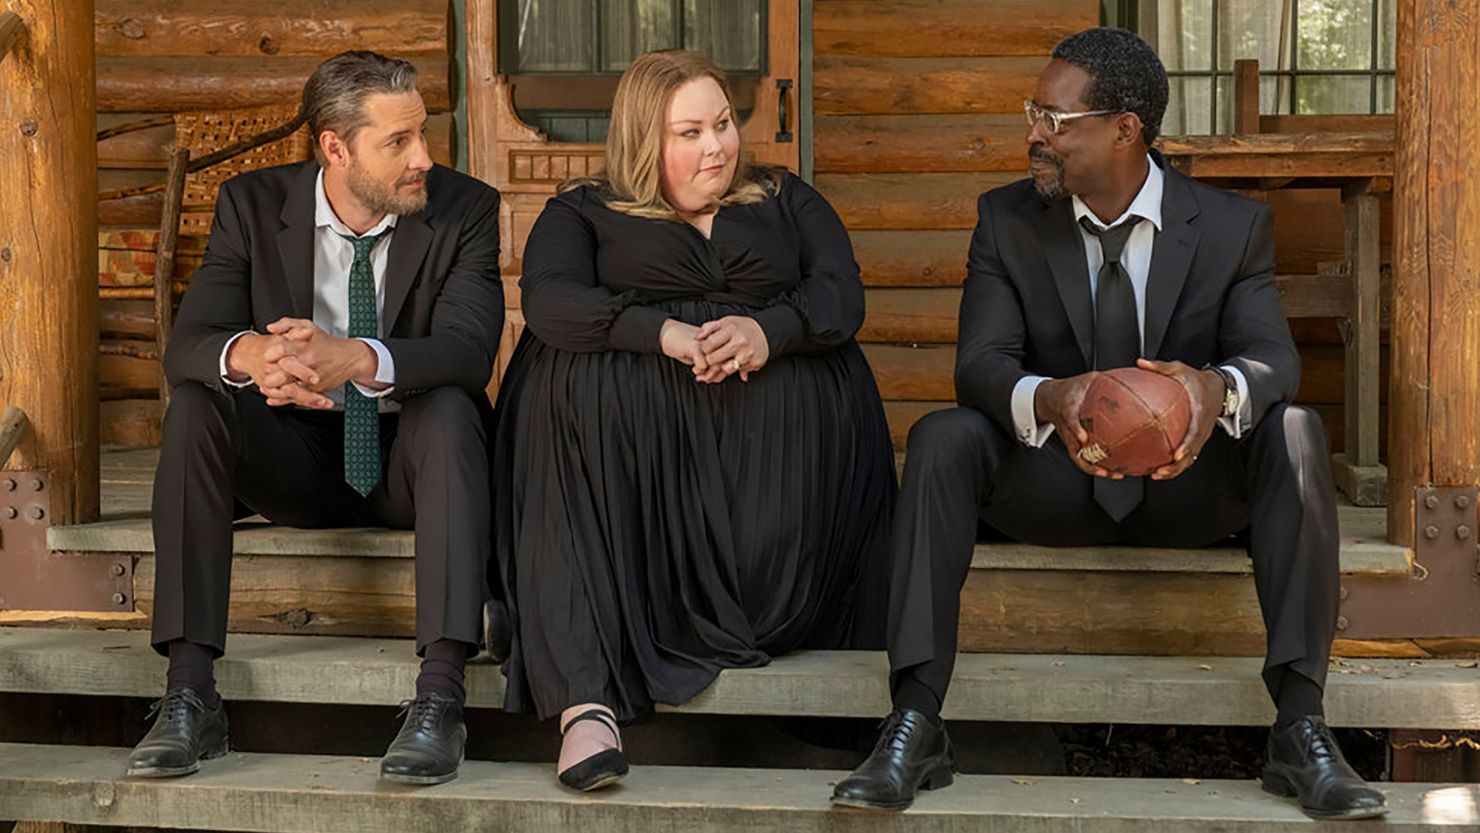 Justin Hartley, Chrissy Metz and Sterling K. Brown in the 'This is Us' series finale.